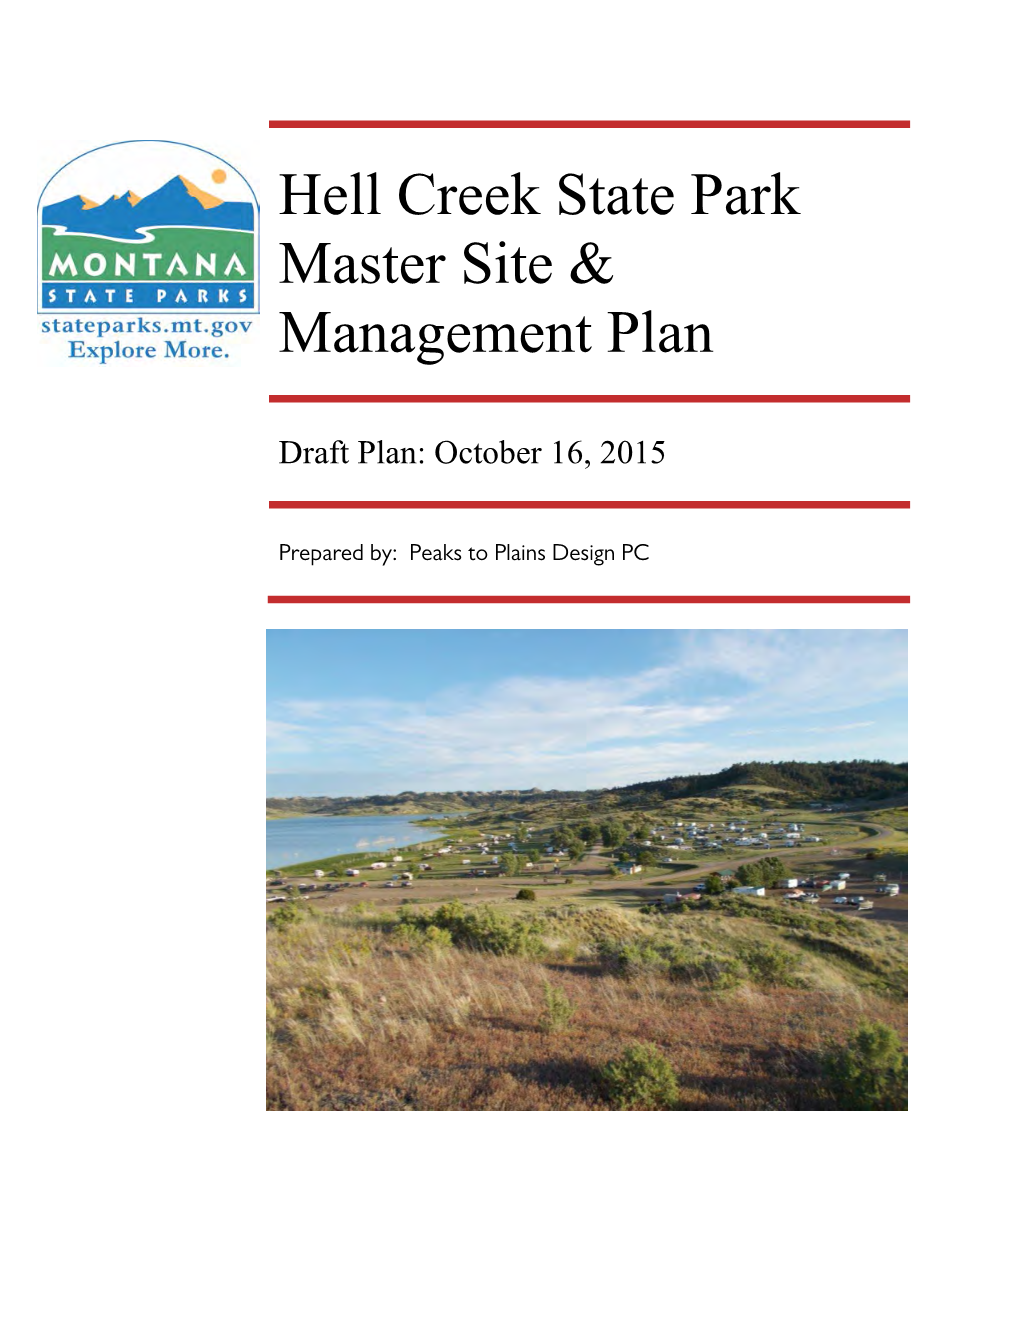 Hell Creek State Park Master Site & Management Plan